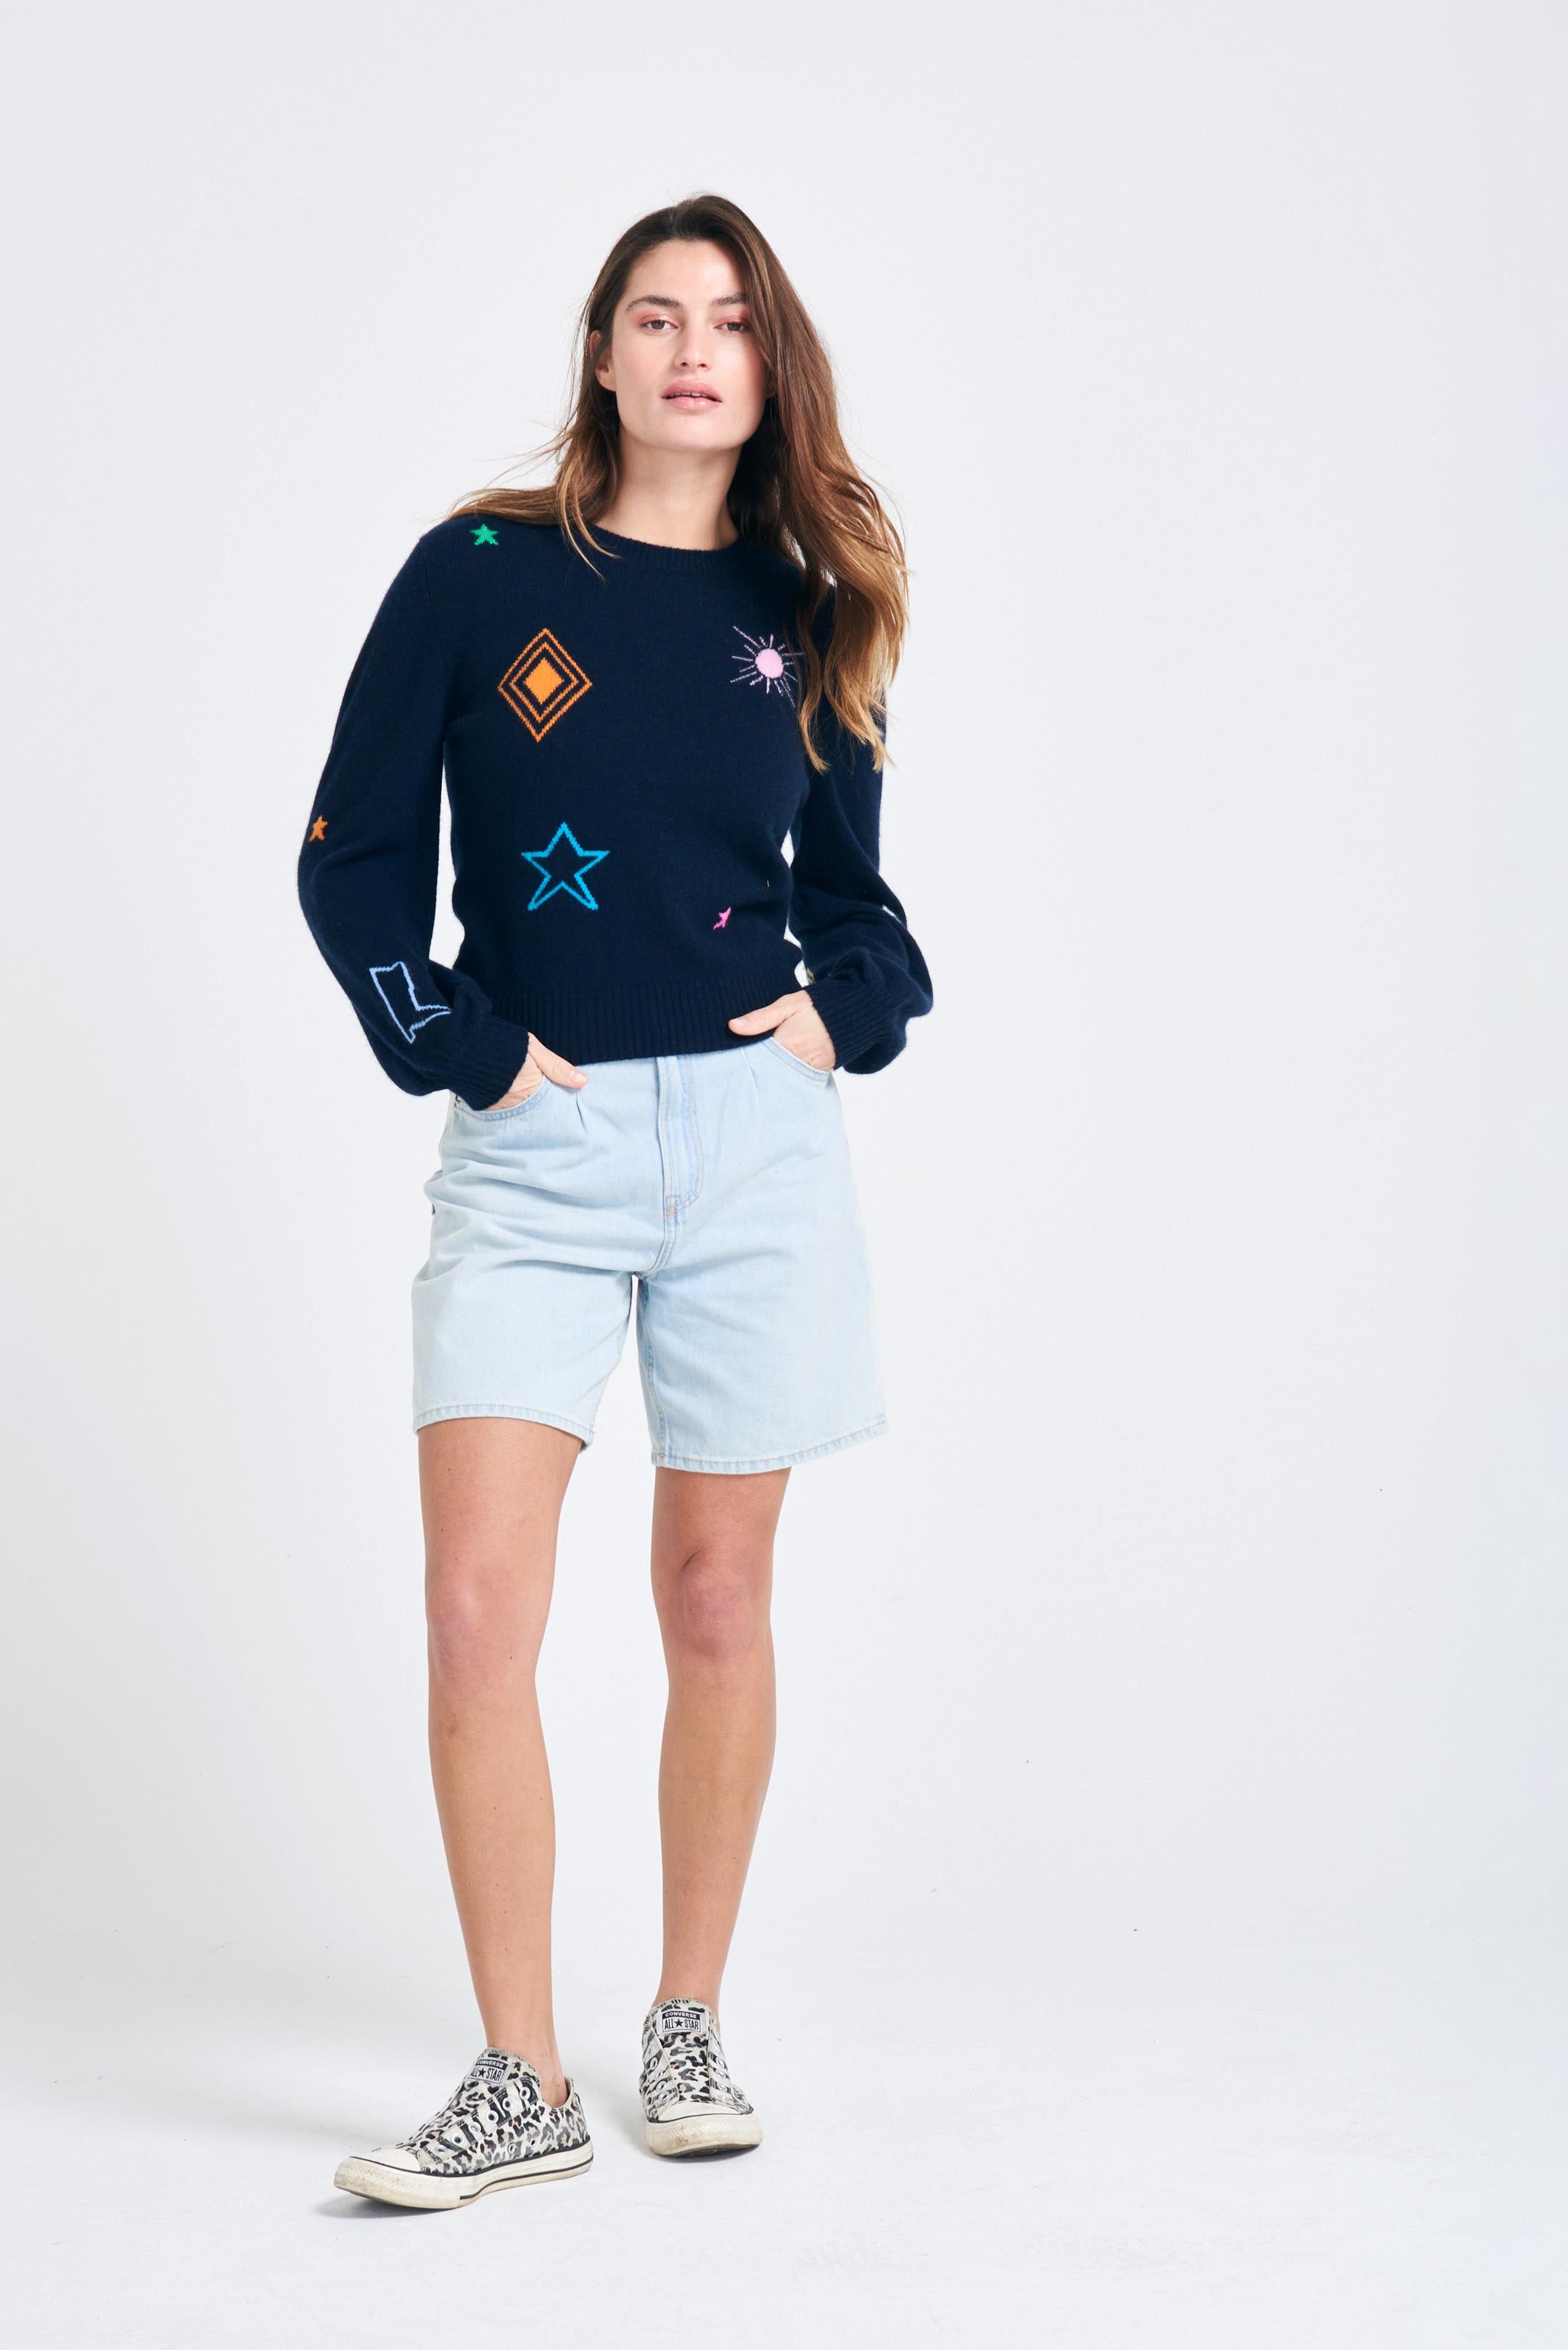 Brown haired female model wearing Jumper1234 Navy cashmere jumper with multi coloured cowboy icons back and front with slightly puff sleeves